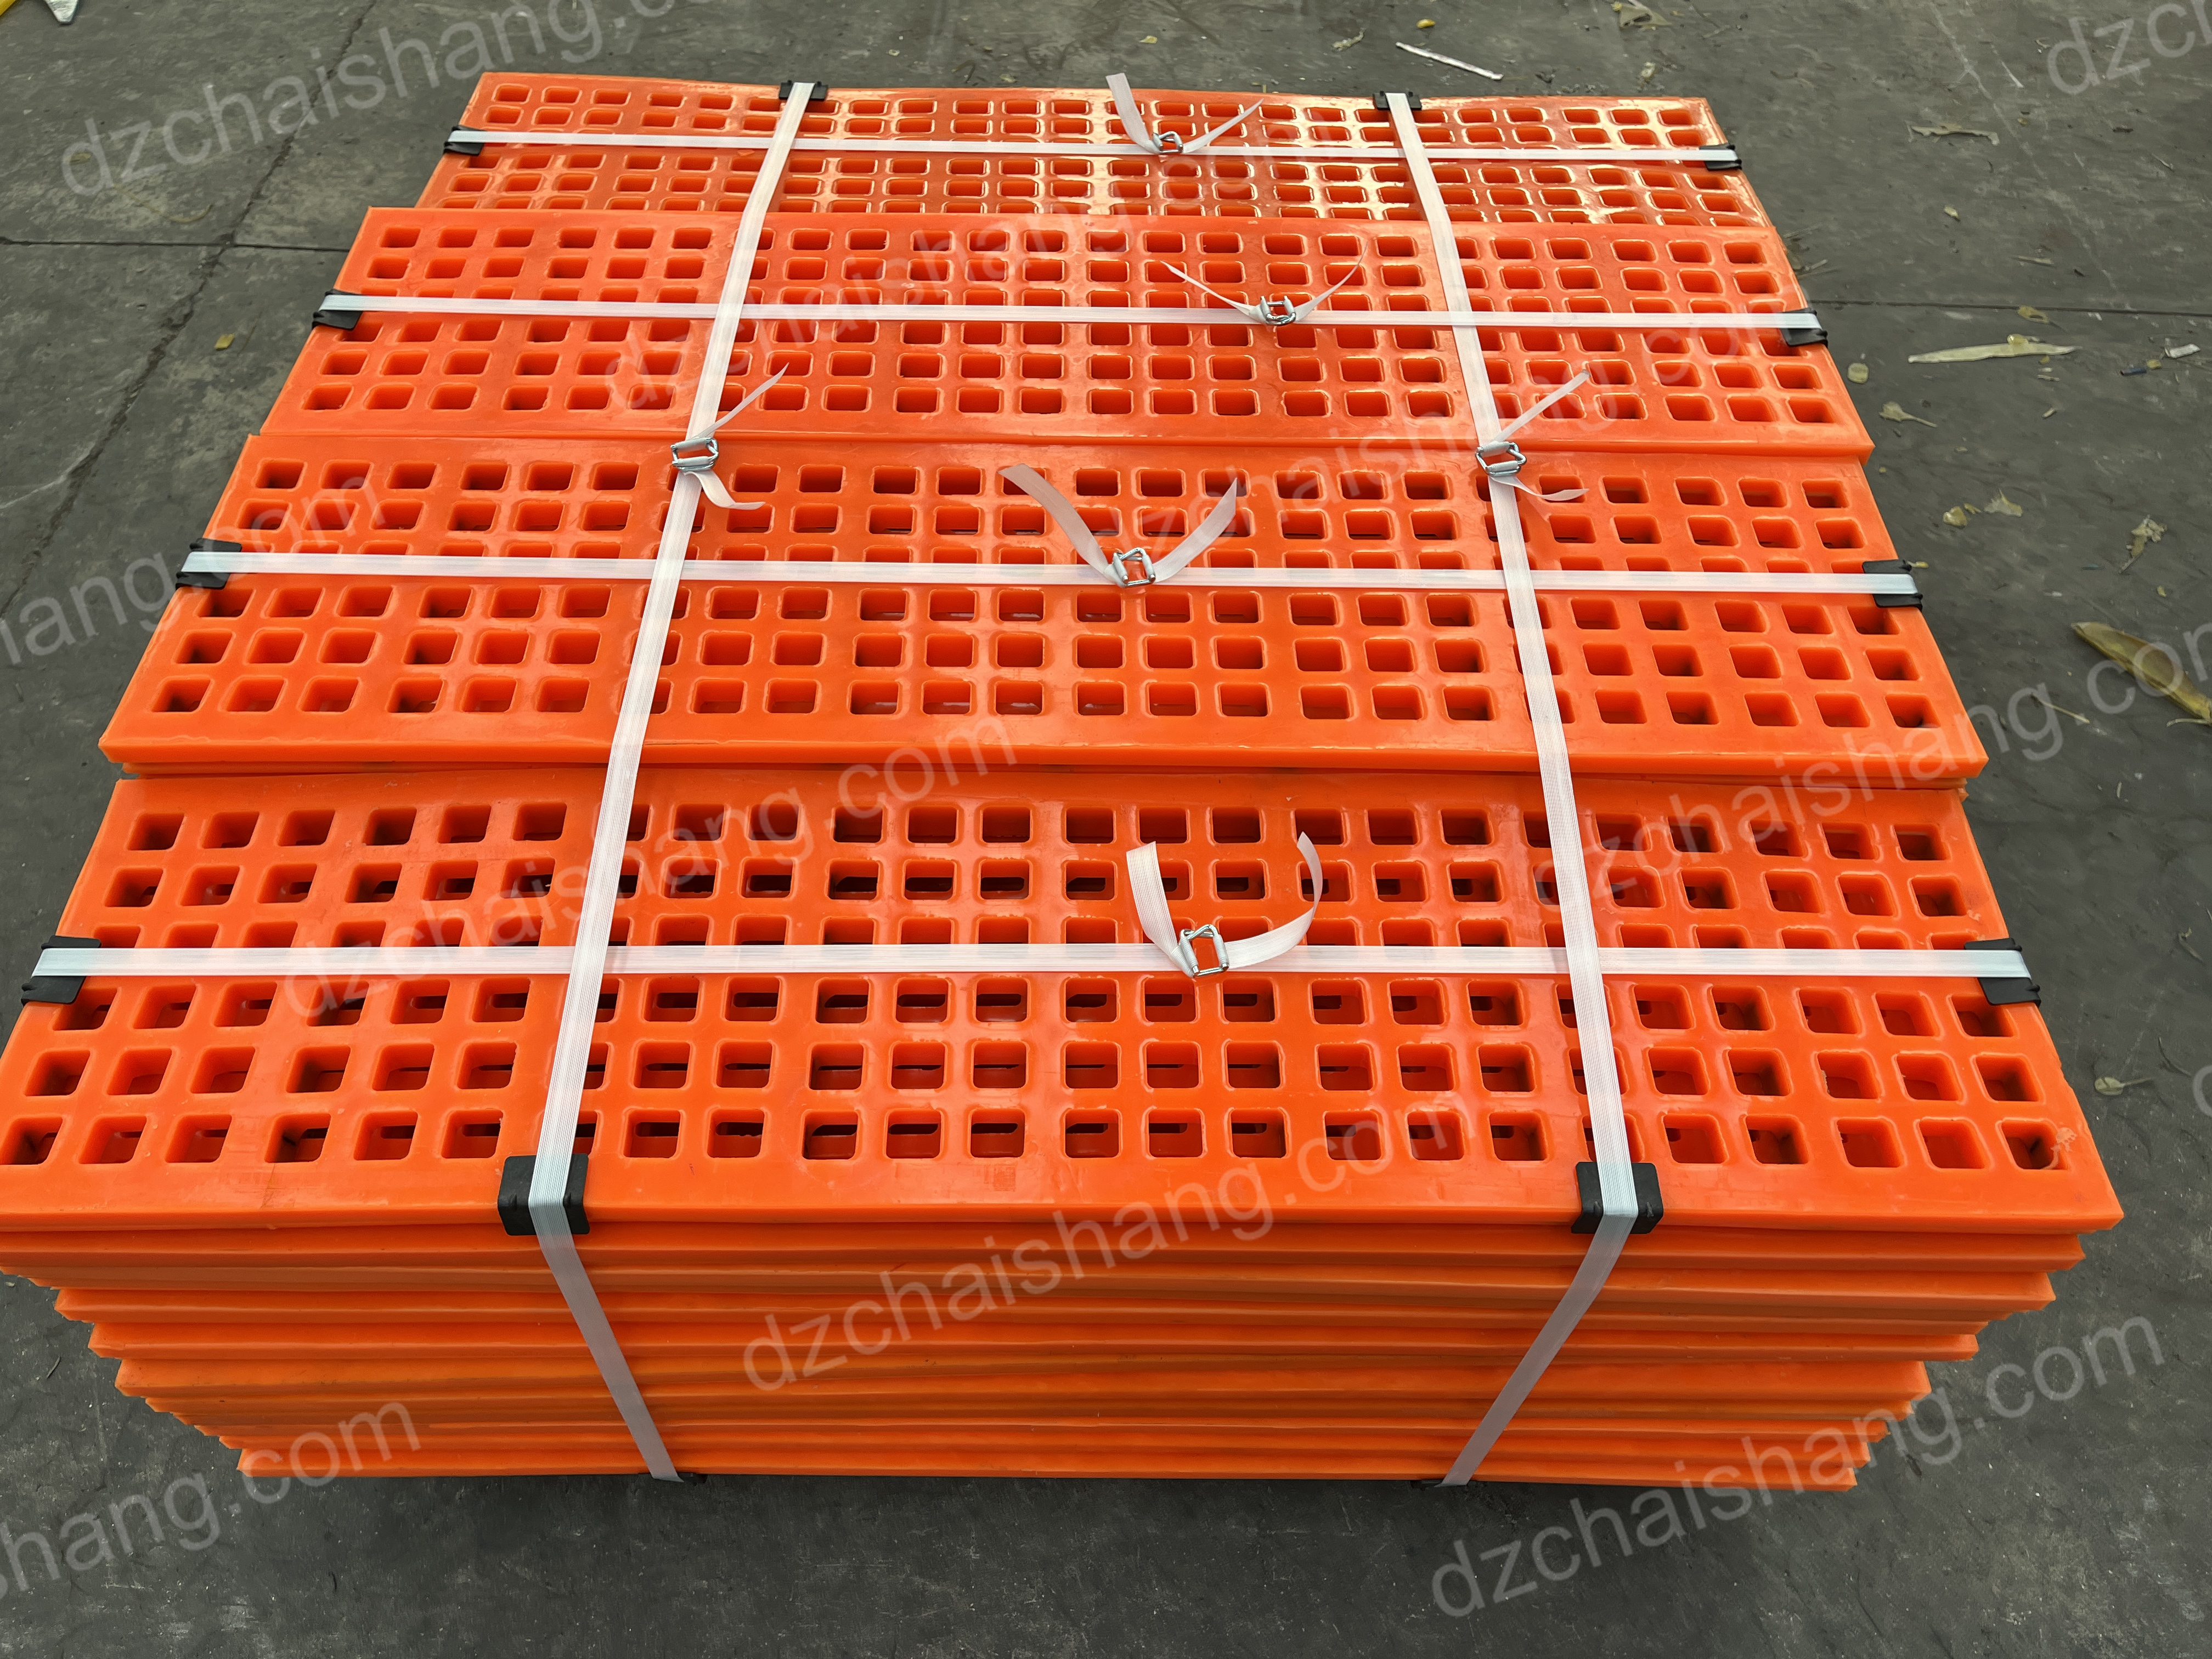 Basic introduction to polyurethane screen-CHAISHANG | Polyurethane Screen,Rubber Screen PanelsHigh frequency screen mesh,Belt Cleaner,Flotation Cell